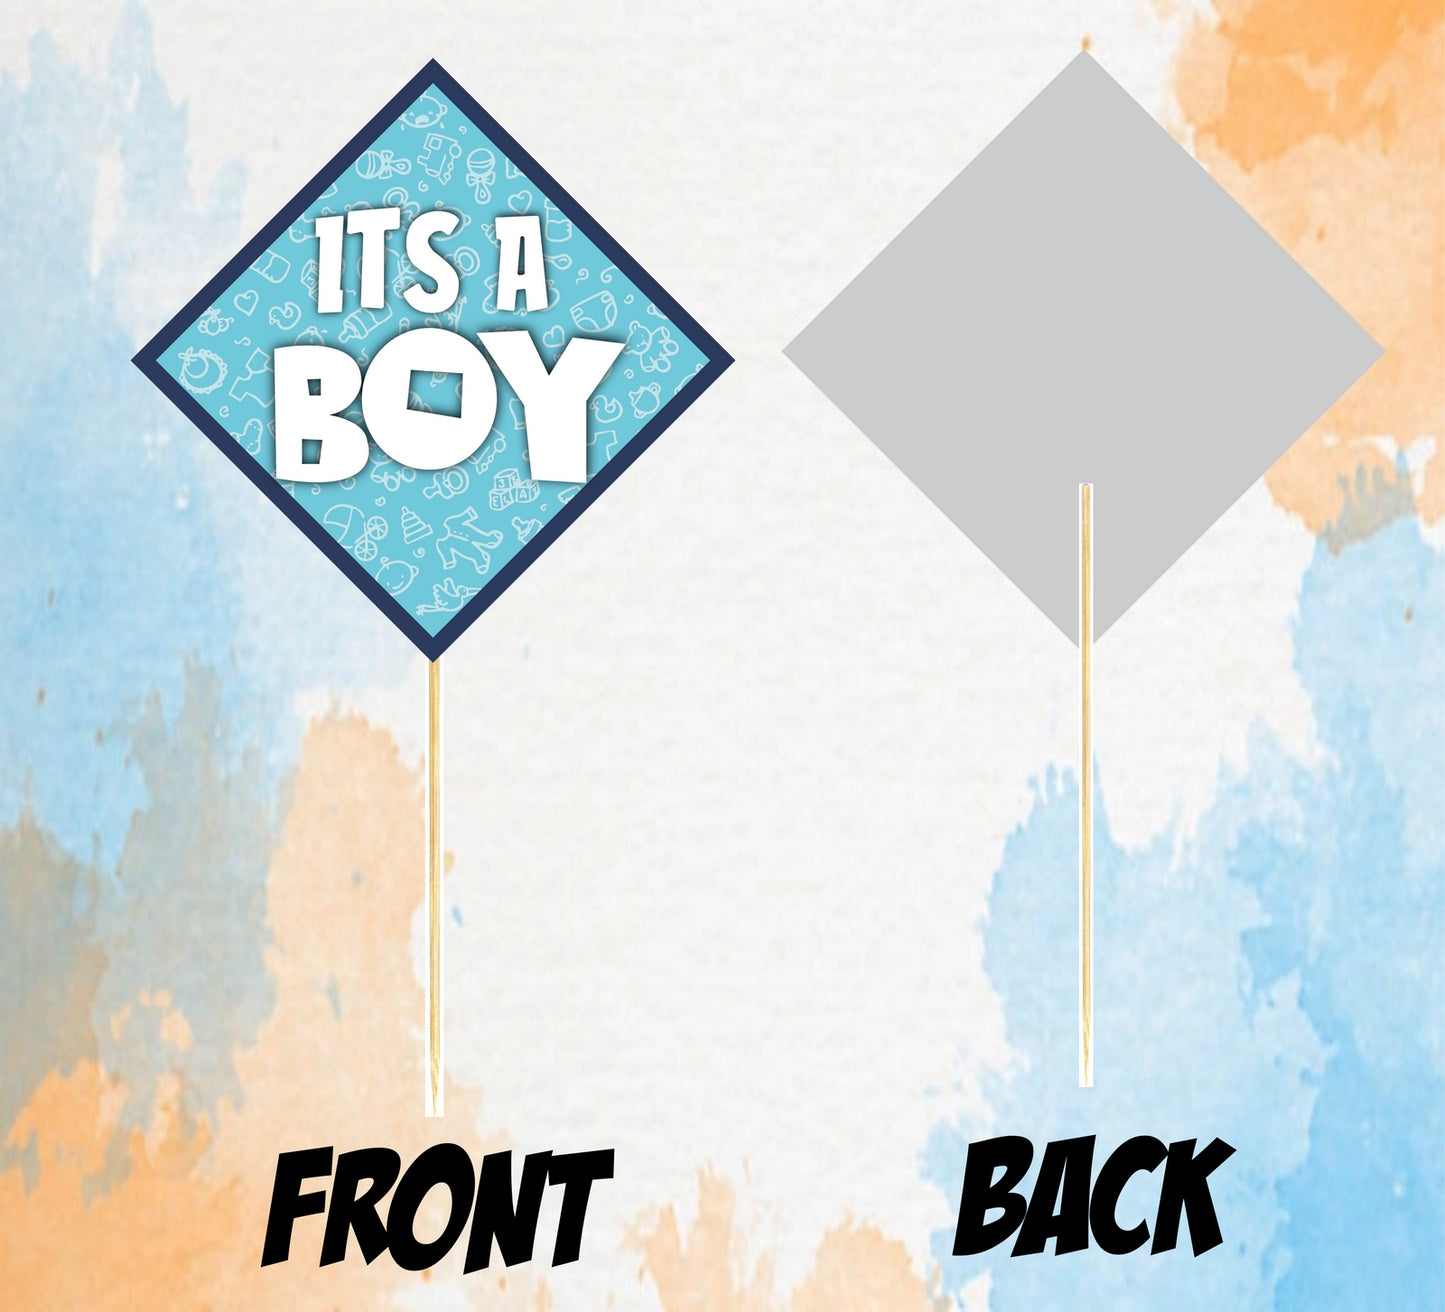 Its a Boy Photo Booth Party Props Baby Boy Baby Welcoming Theme Party Decoration Photo Booth Party Item for Adults and Kids (Pack of 10)